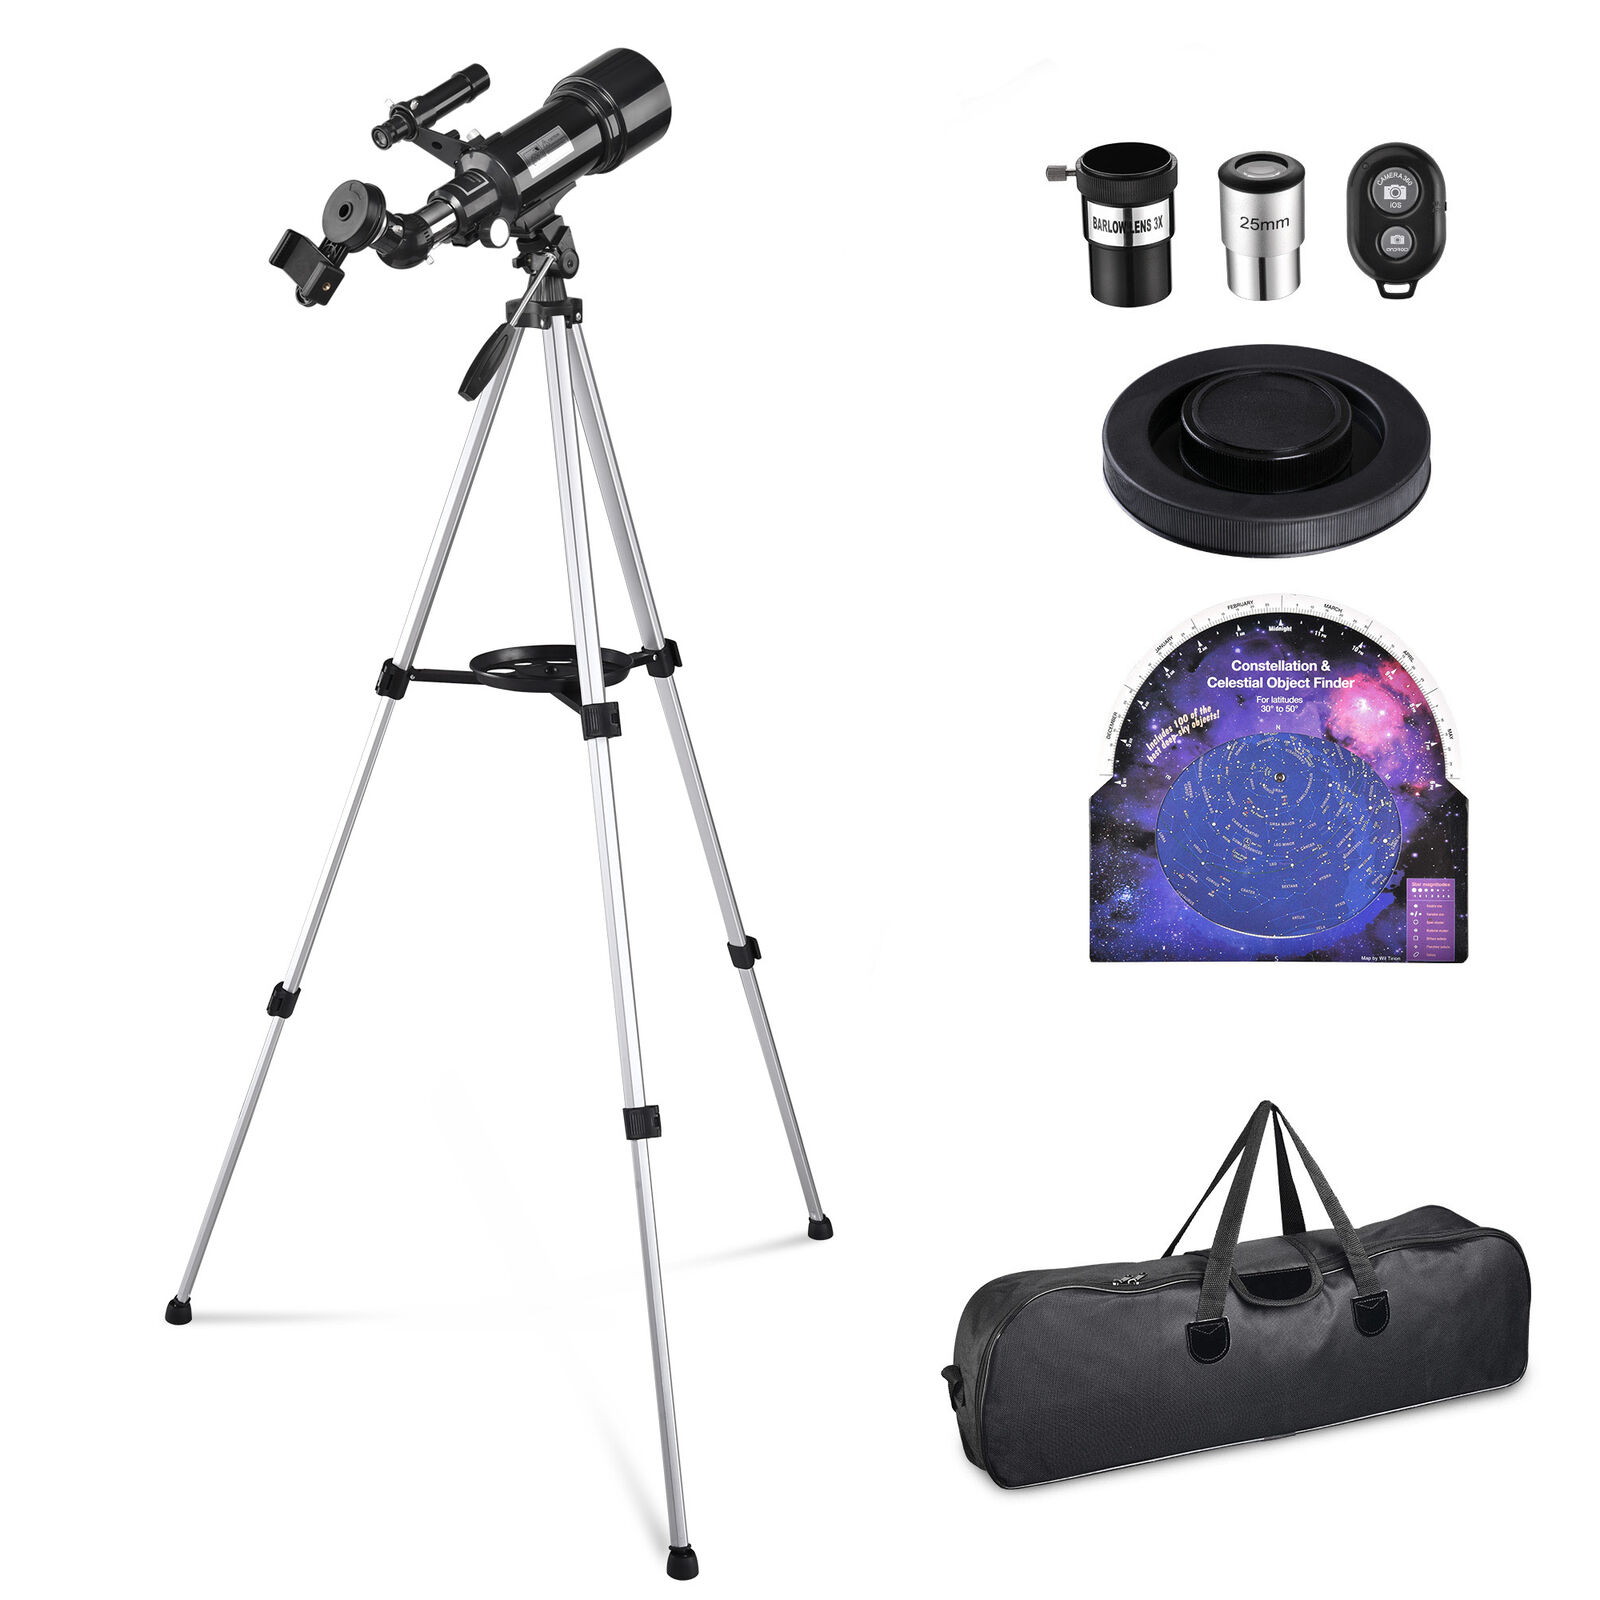 Professional 400x70mm Refractor Astronomical Telescope Tripod Adults Kids Gift